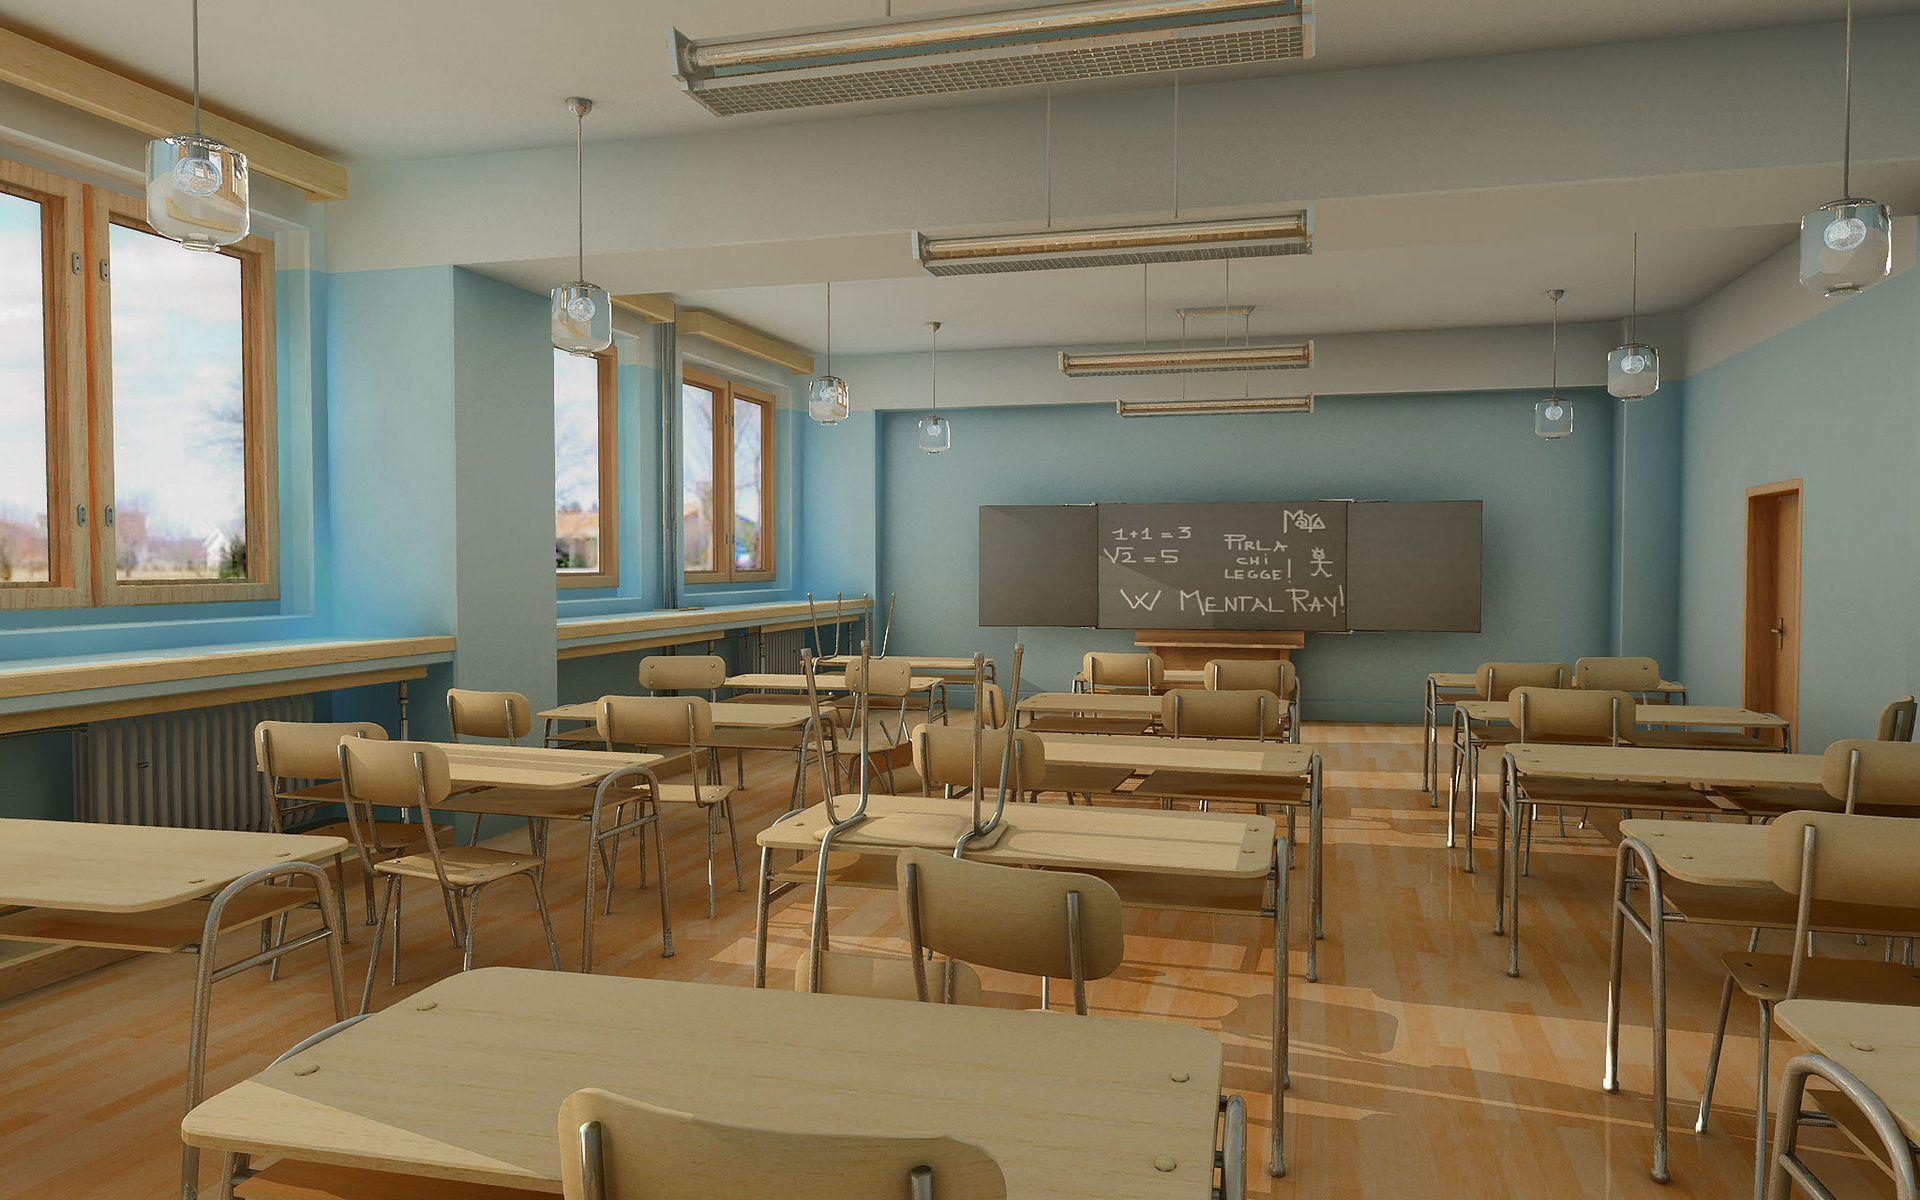 Classroom Wallpaper, HD Image Classroom Collection